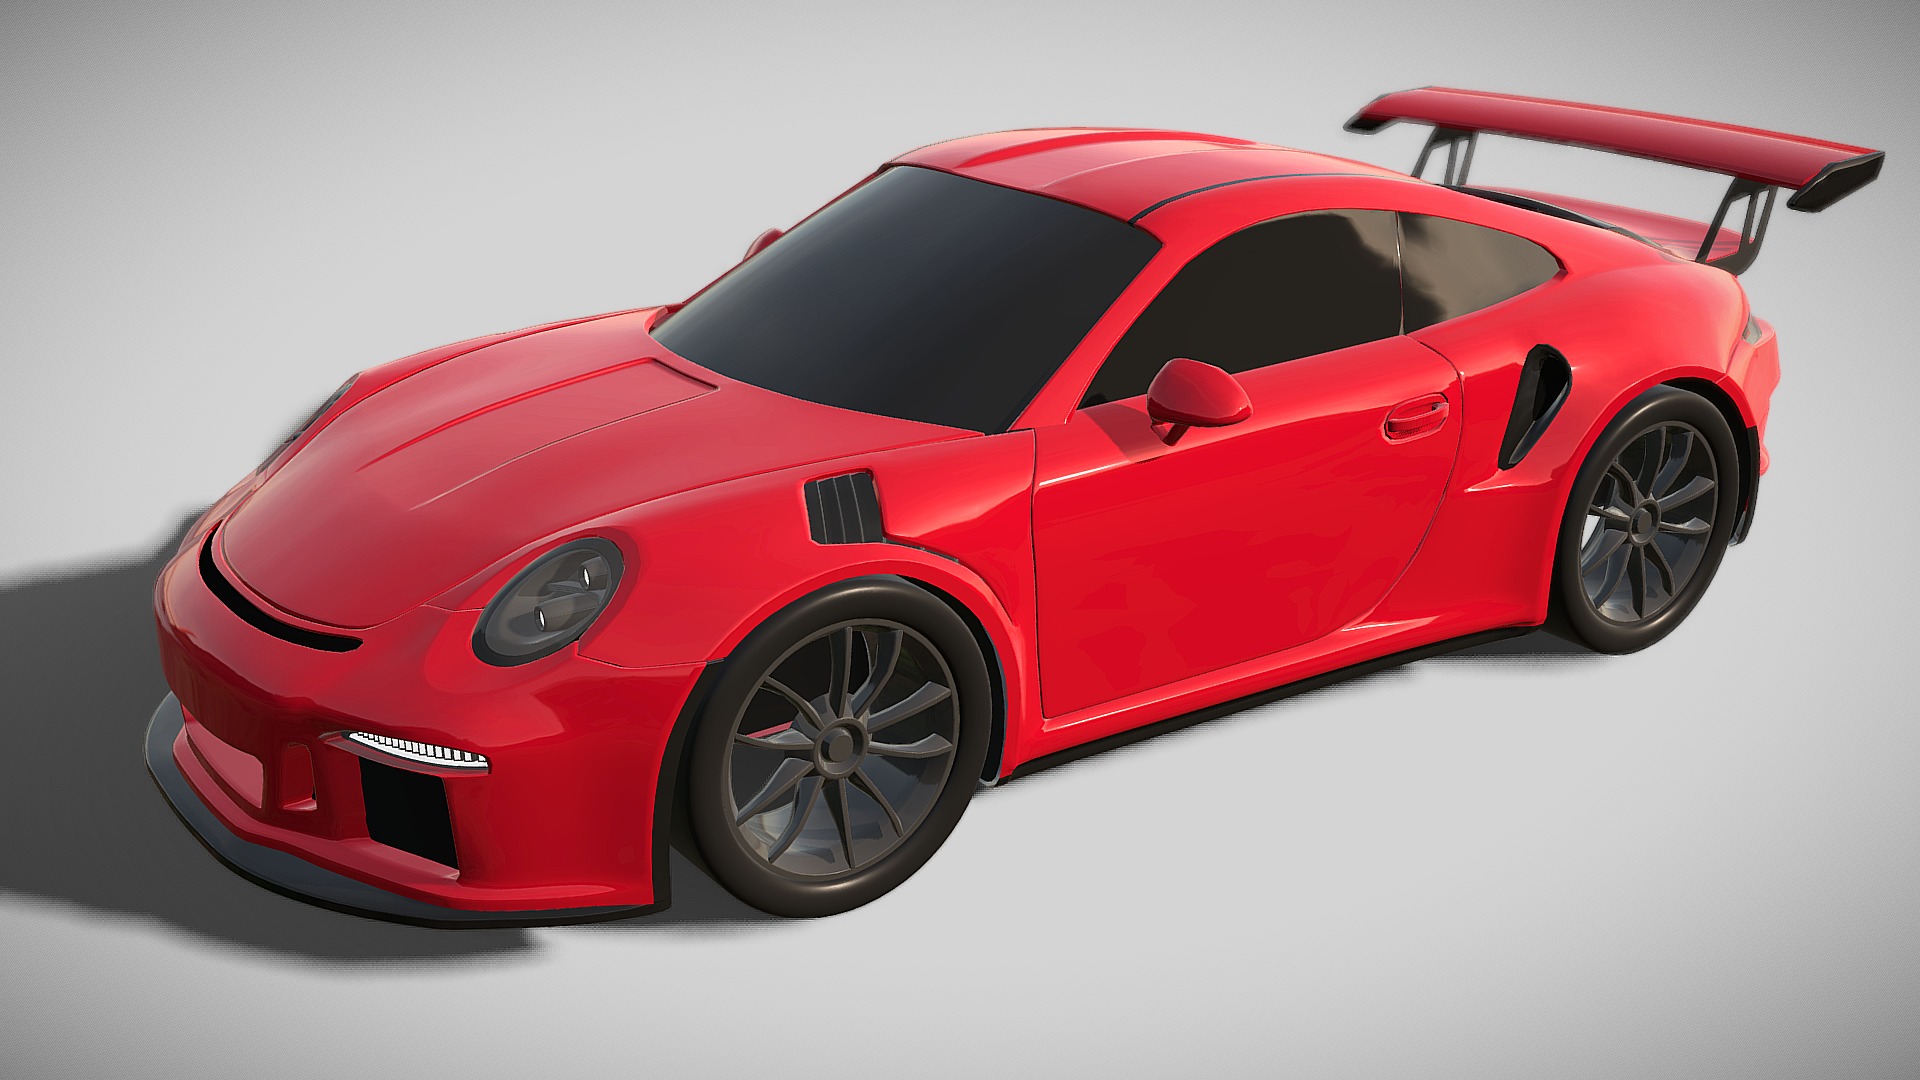 3D model Porsche Carrera 911 GTS3 year 2015 - This is a 3D model of the Porsche Carrera 911 GTS3 year 2015. The 3D model is about a red sports car.